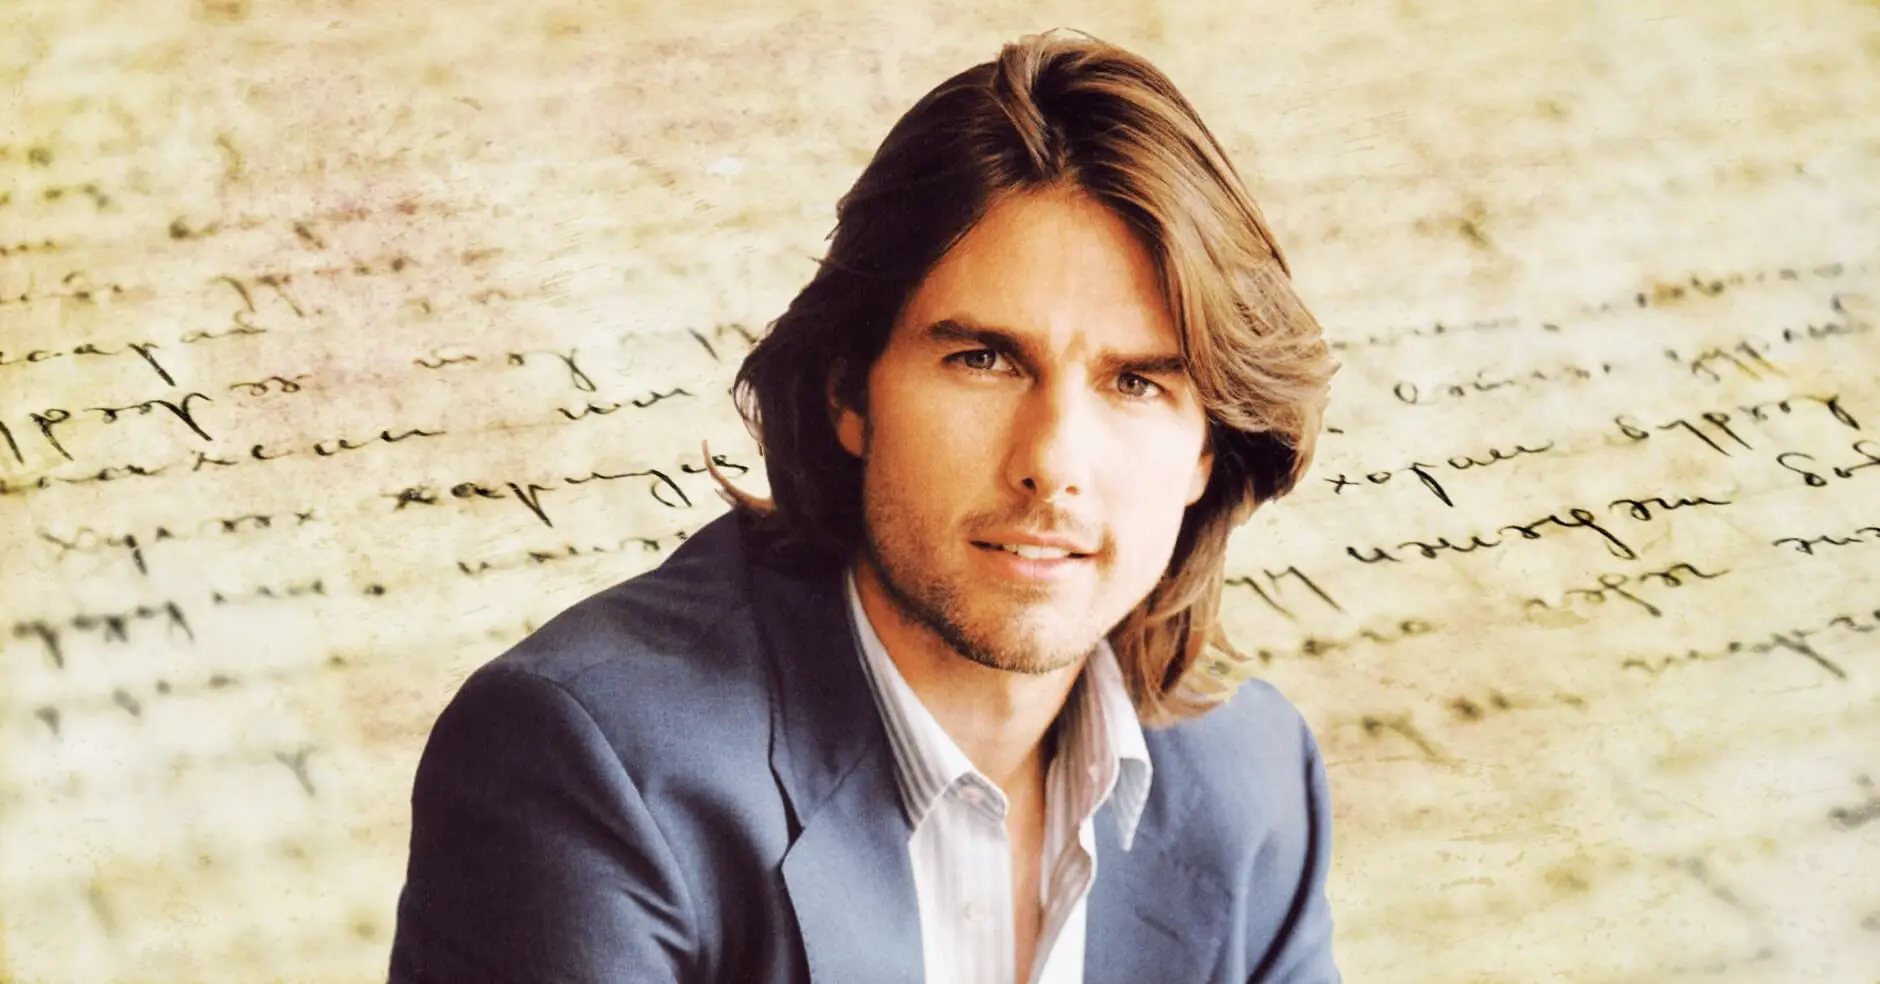 Tom Cruise Dyslexia and how he overcame it to become a Hollywood megastar